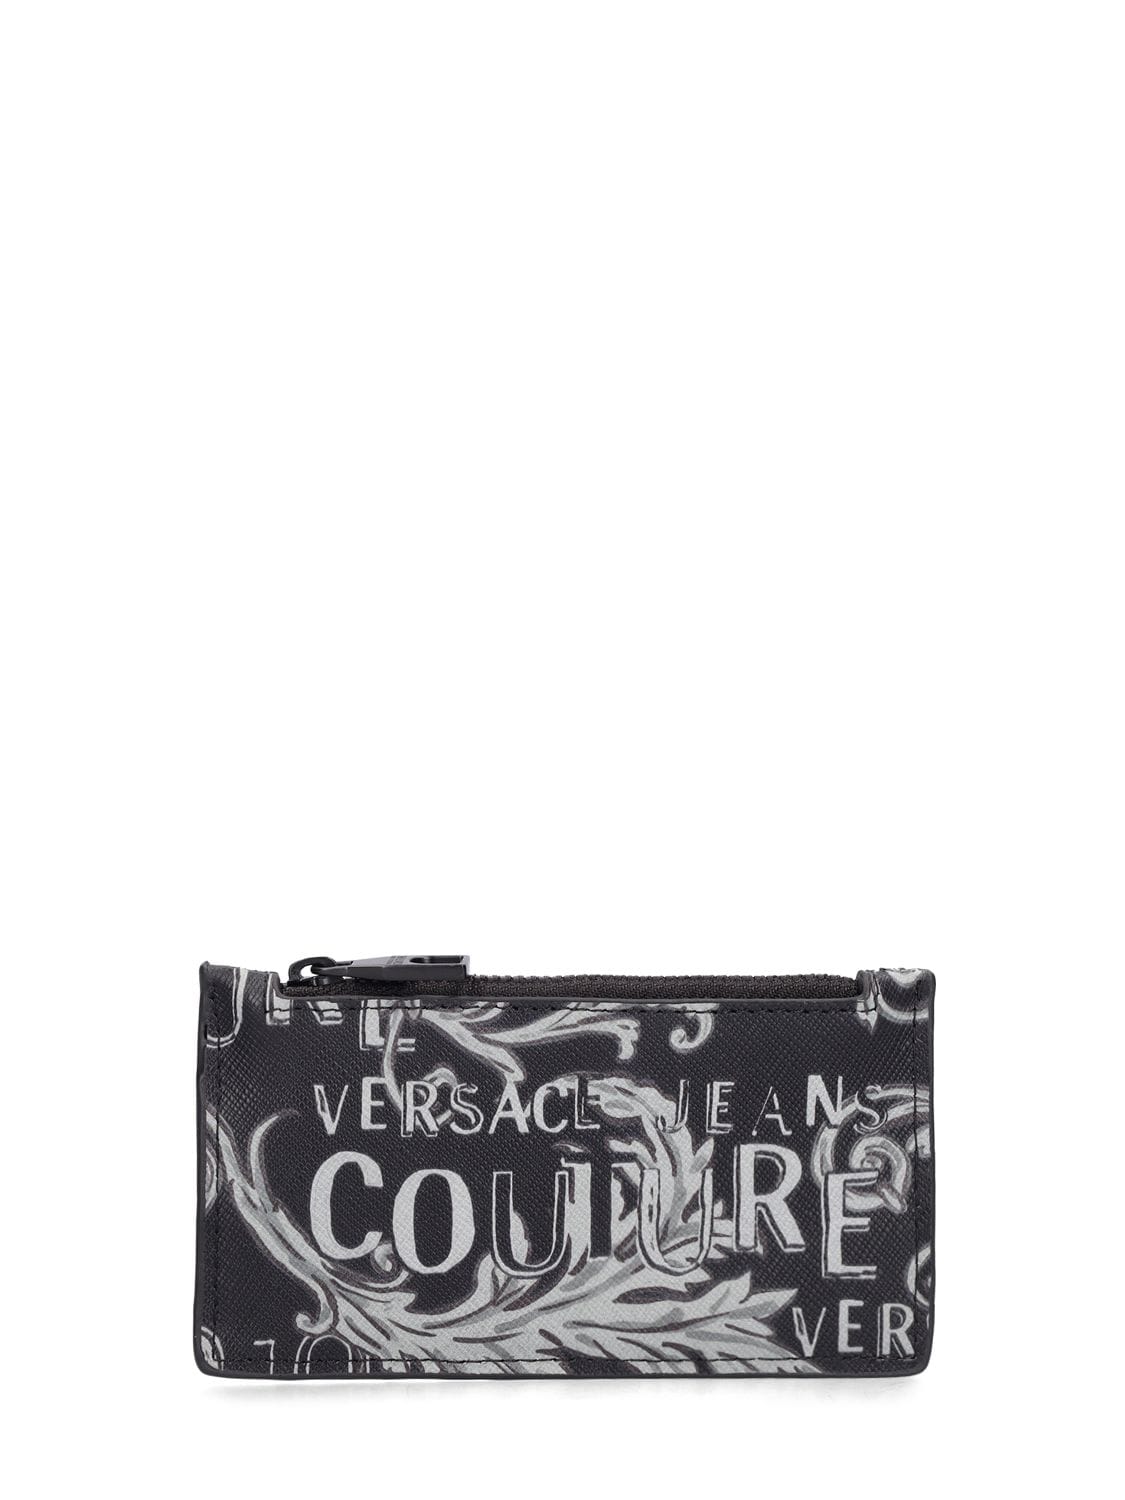 VERSACE JEANS COUTURE BAROQUE SAFFIANO LEATHER ZIP-UP WALLET